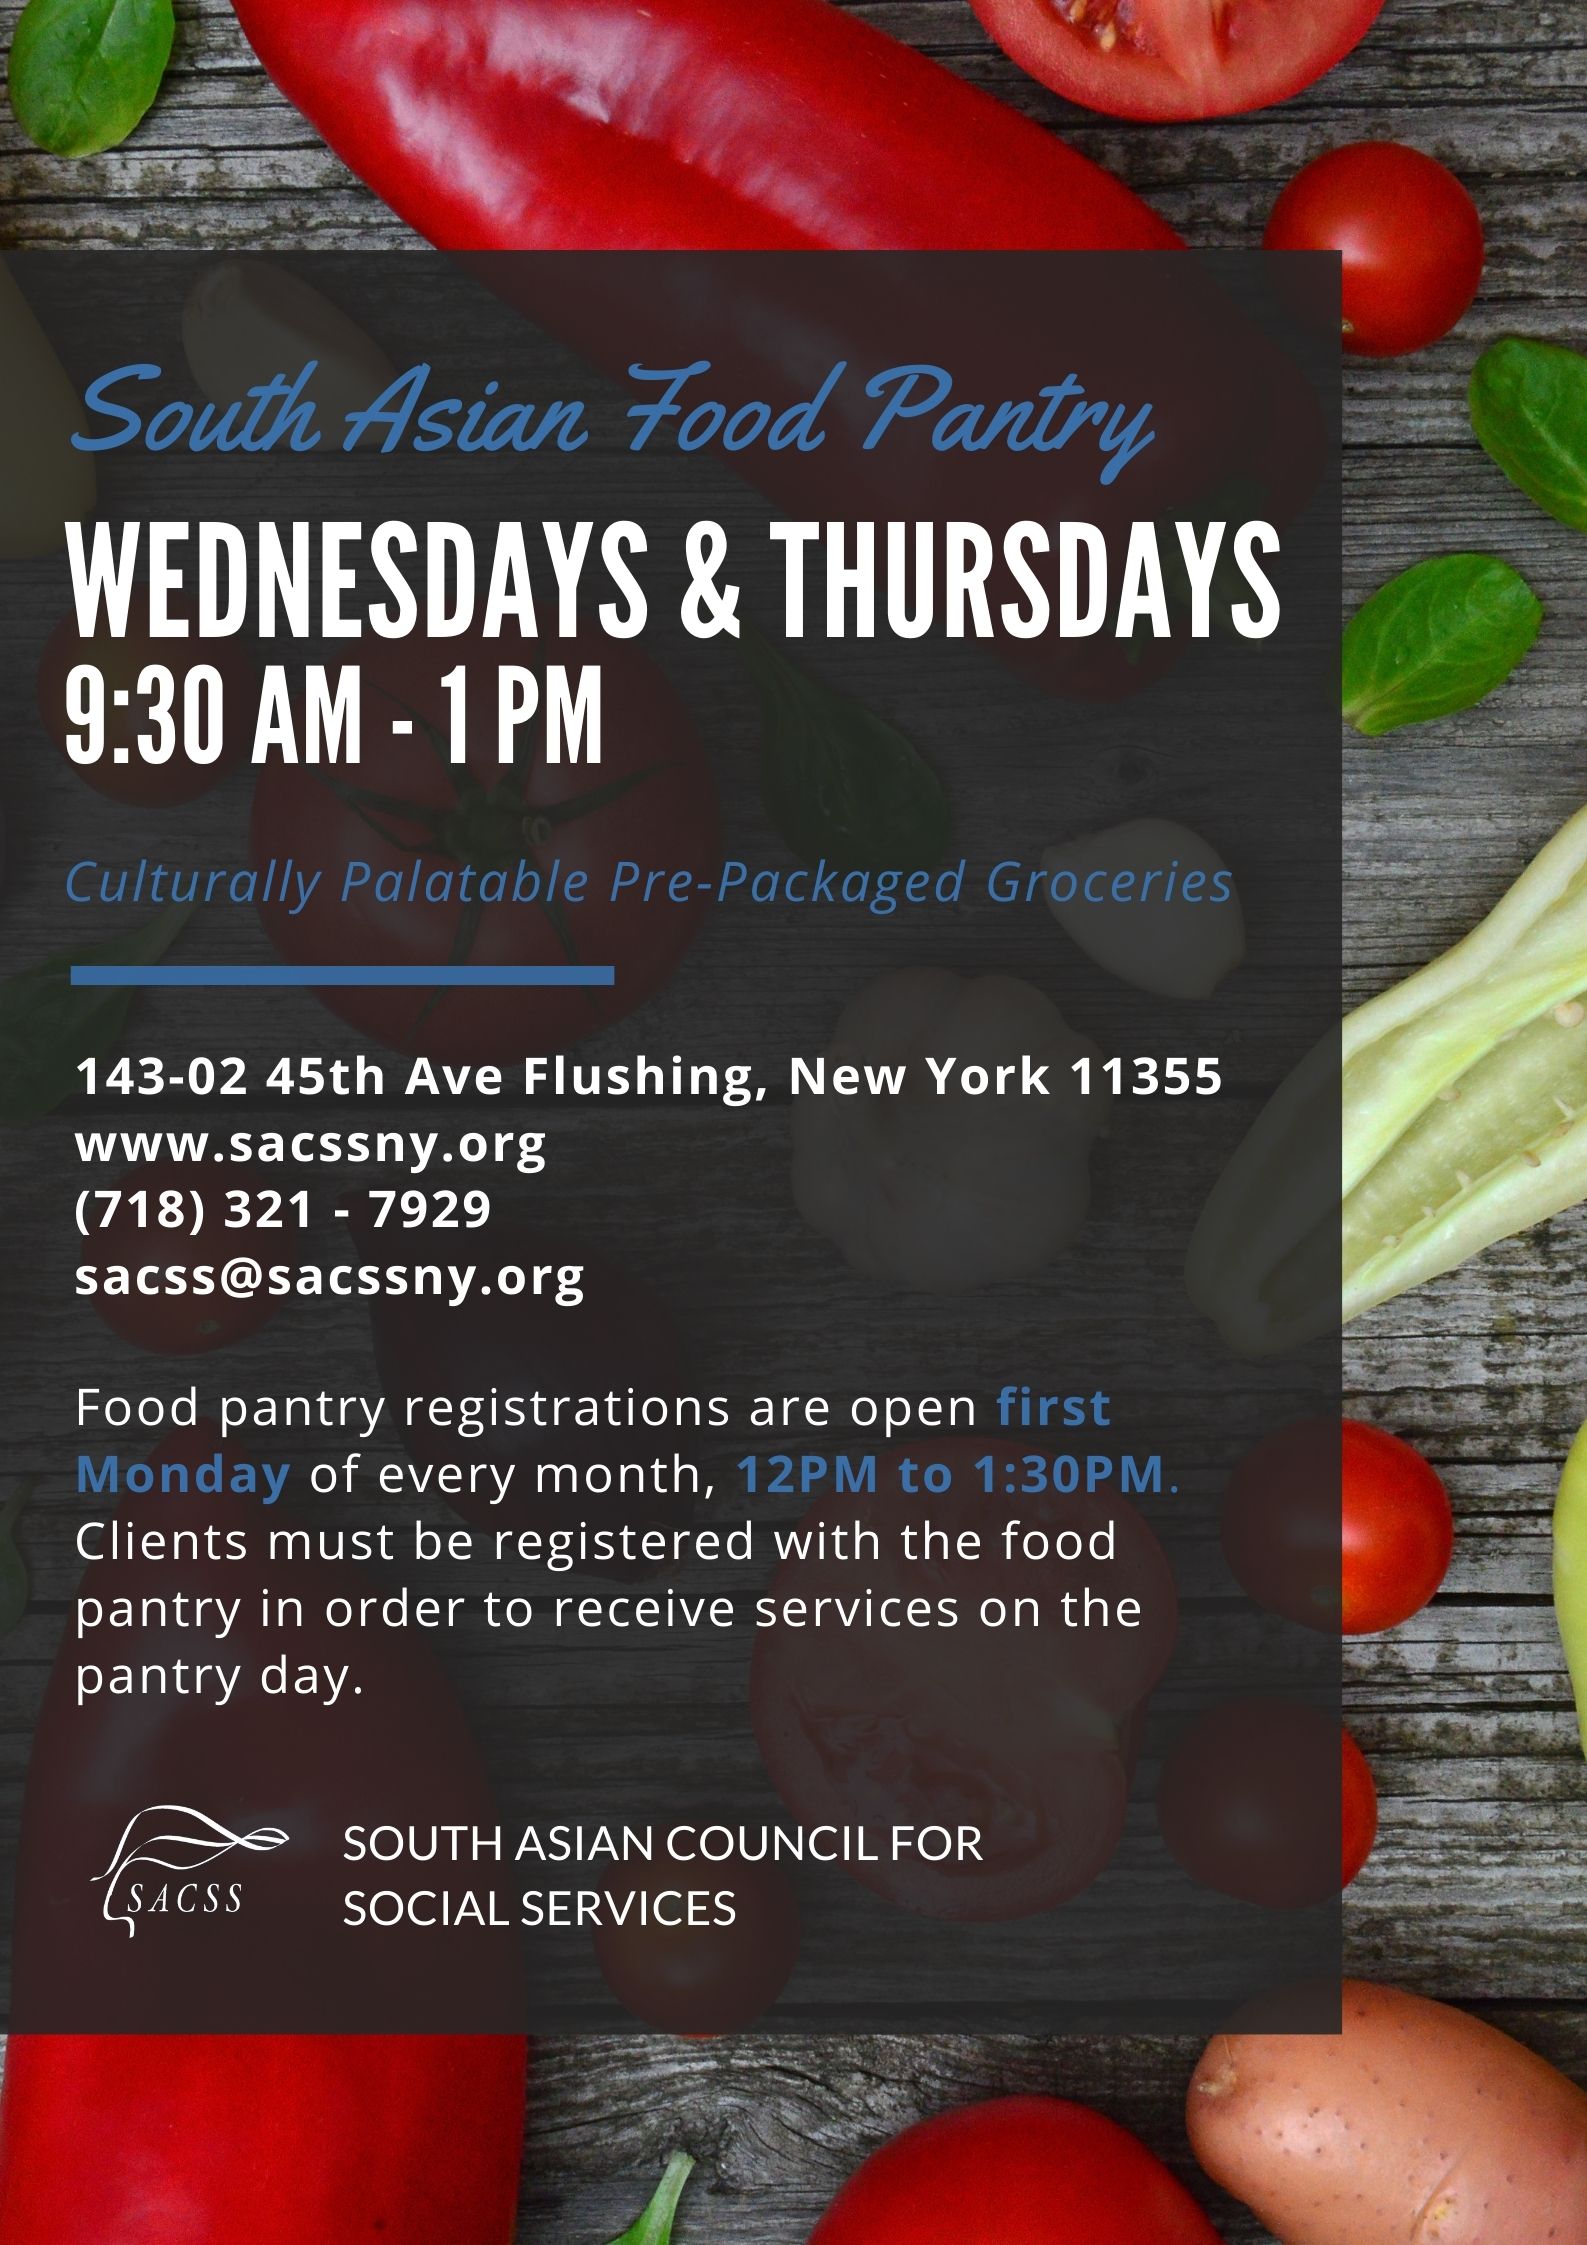 South Asian Food Pantry Flyer